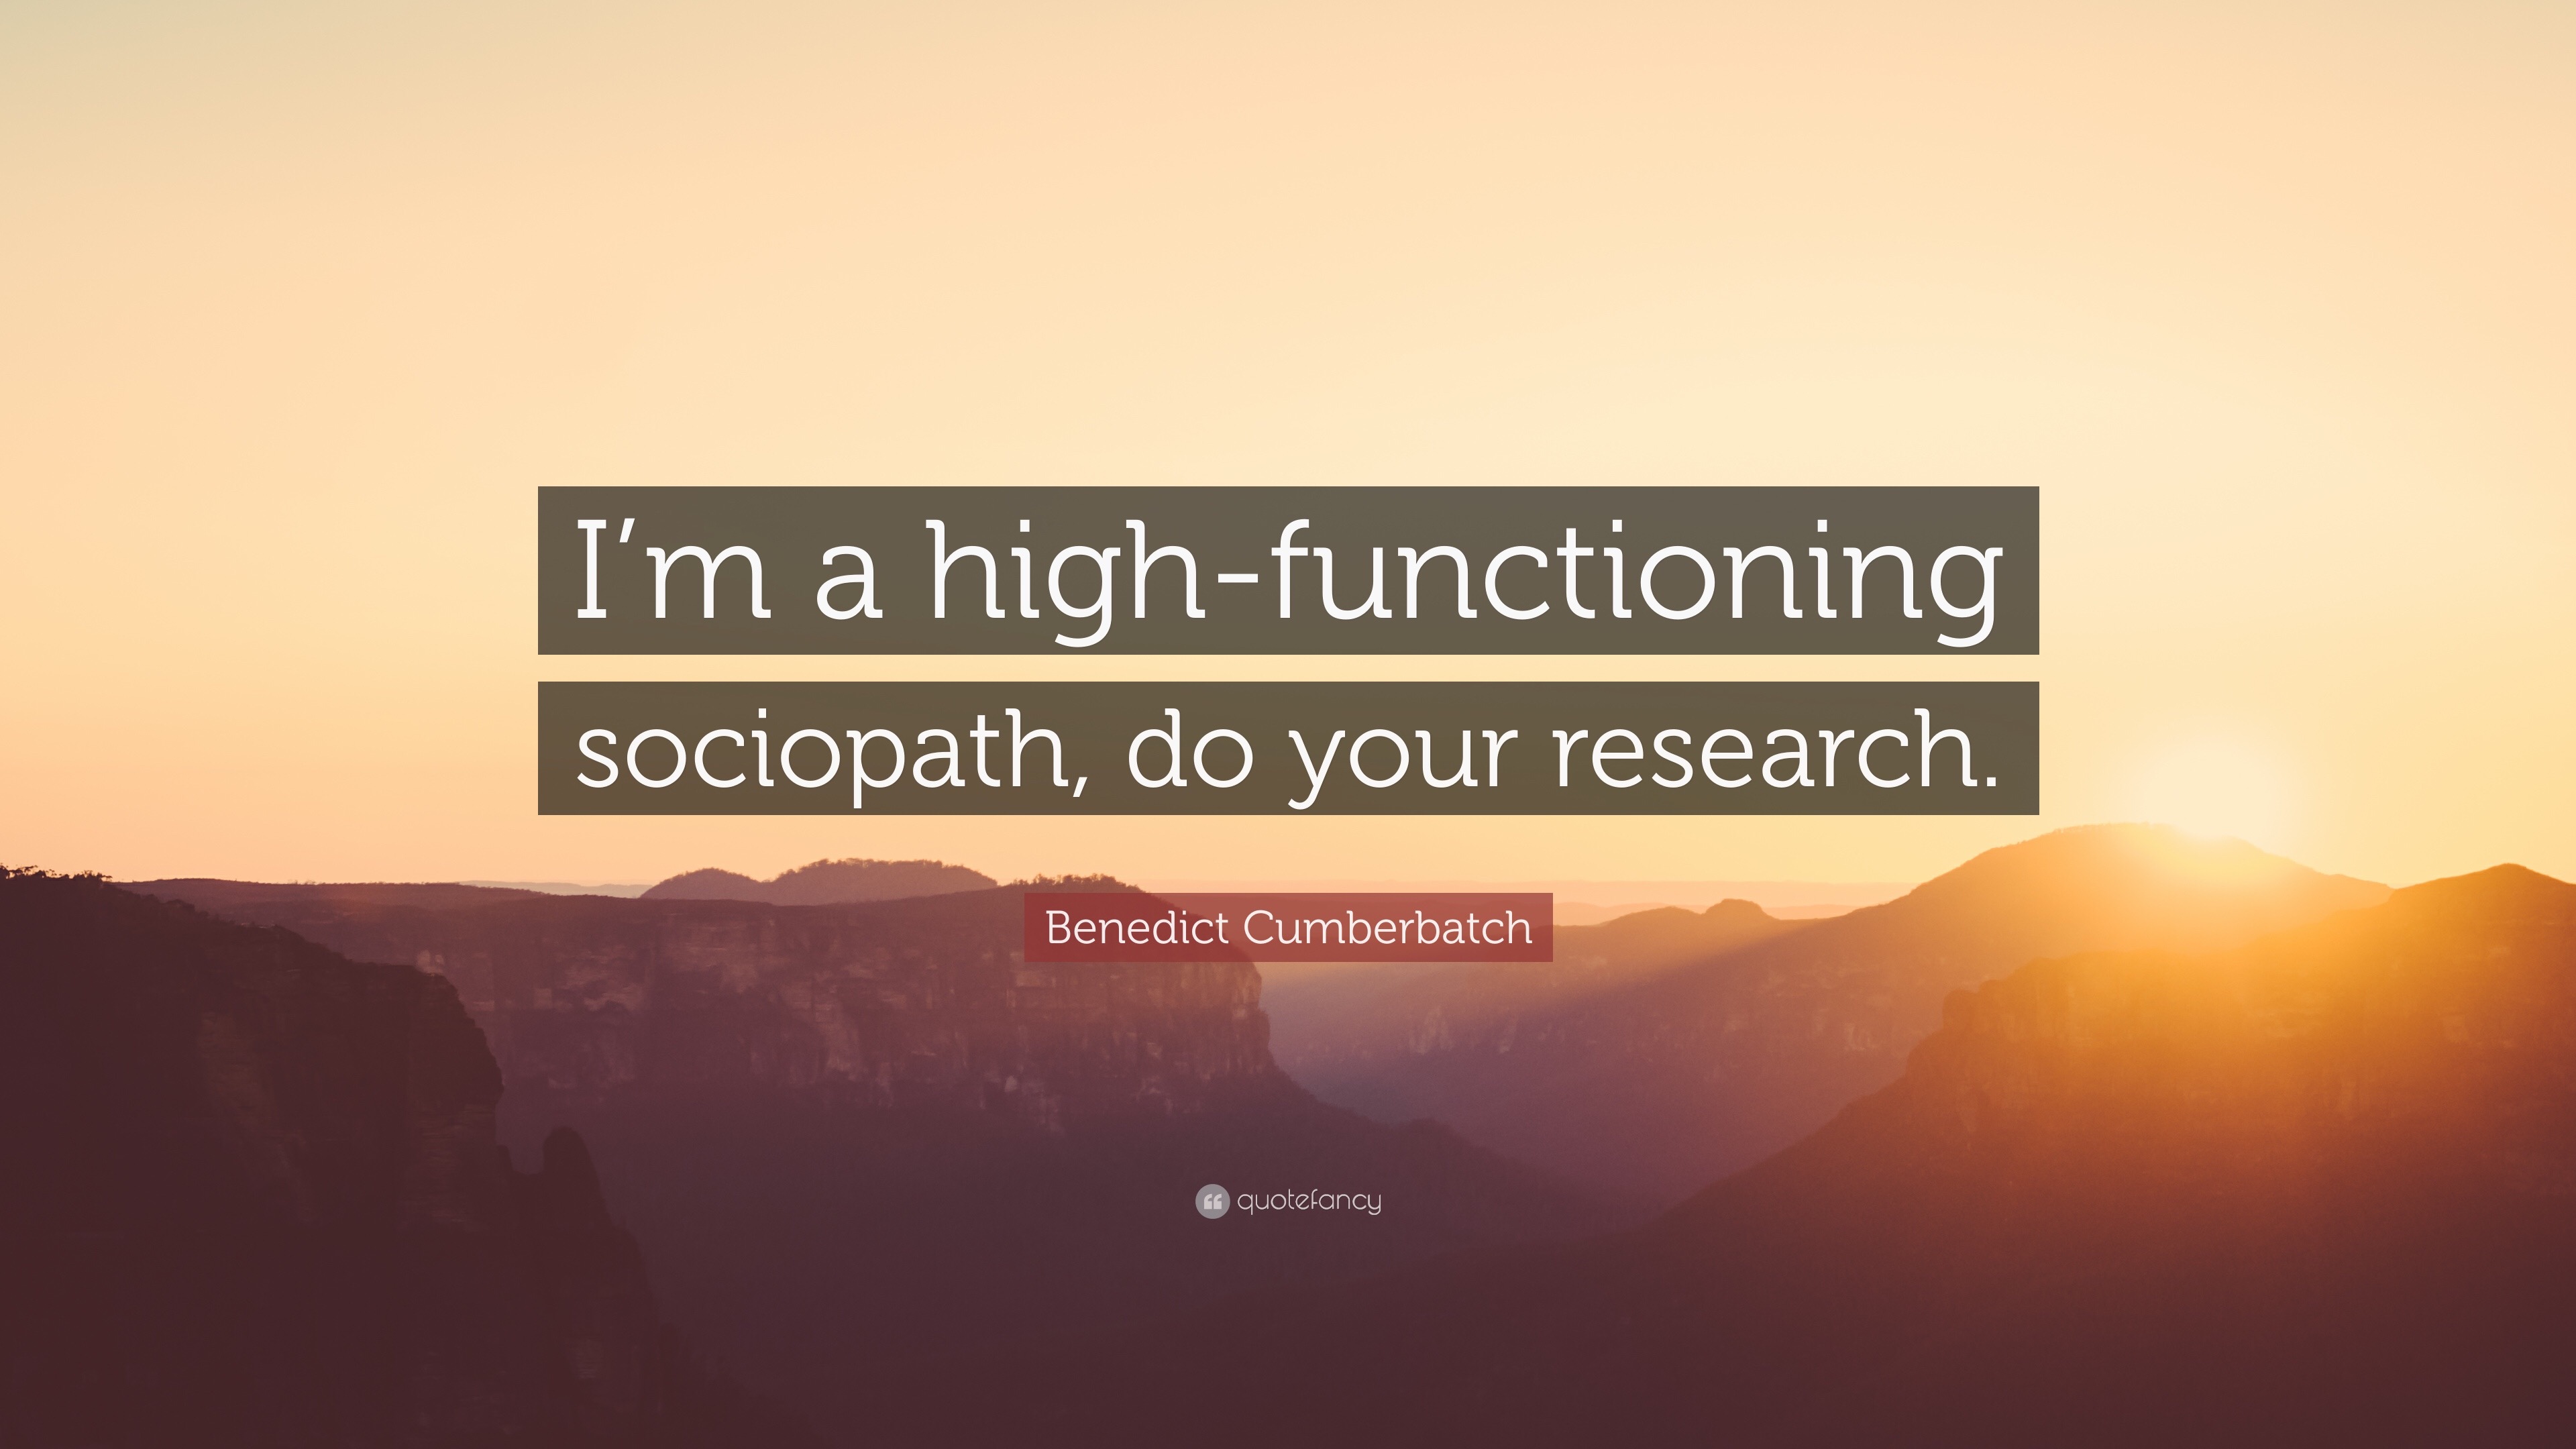 This visual is about quotefancy benedictcumberbatch sherlock #quotefancy #b...